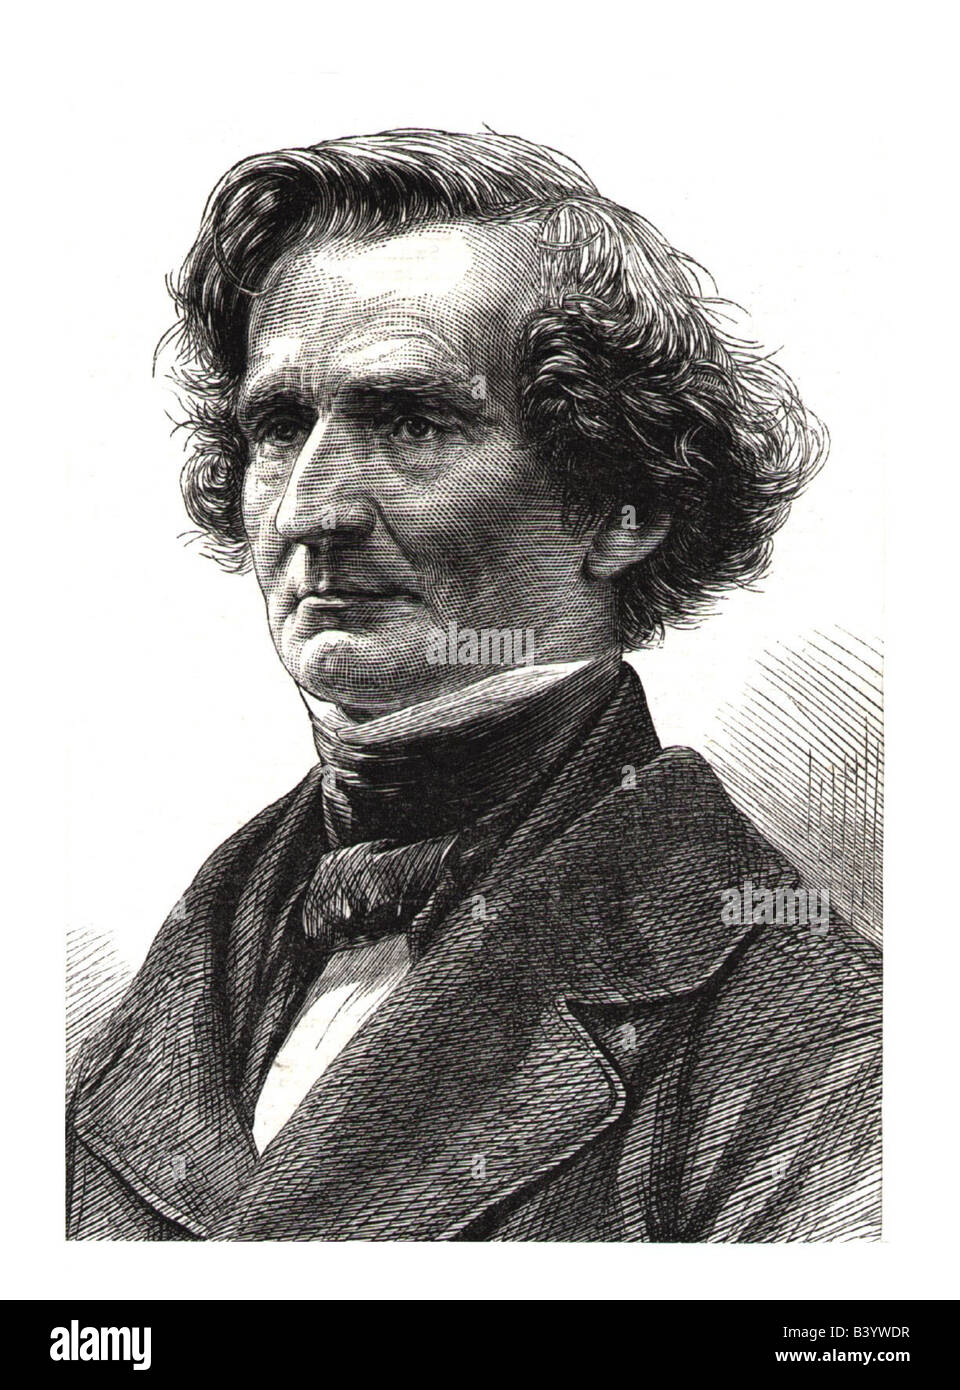 Berlioz, Hector Louis, 11.12.1803 - 8-3-1869, French composer, portrait, engraving from London Illustrated News, 19th century, , Stock Photo